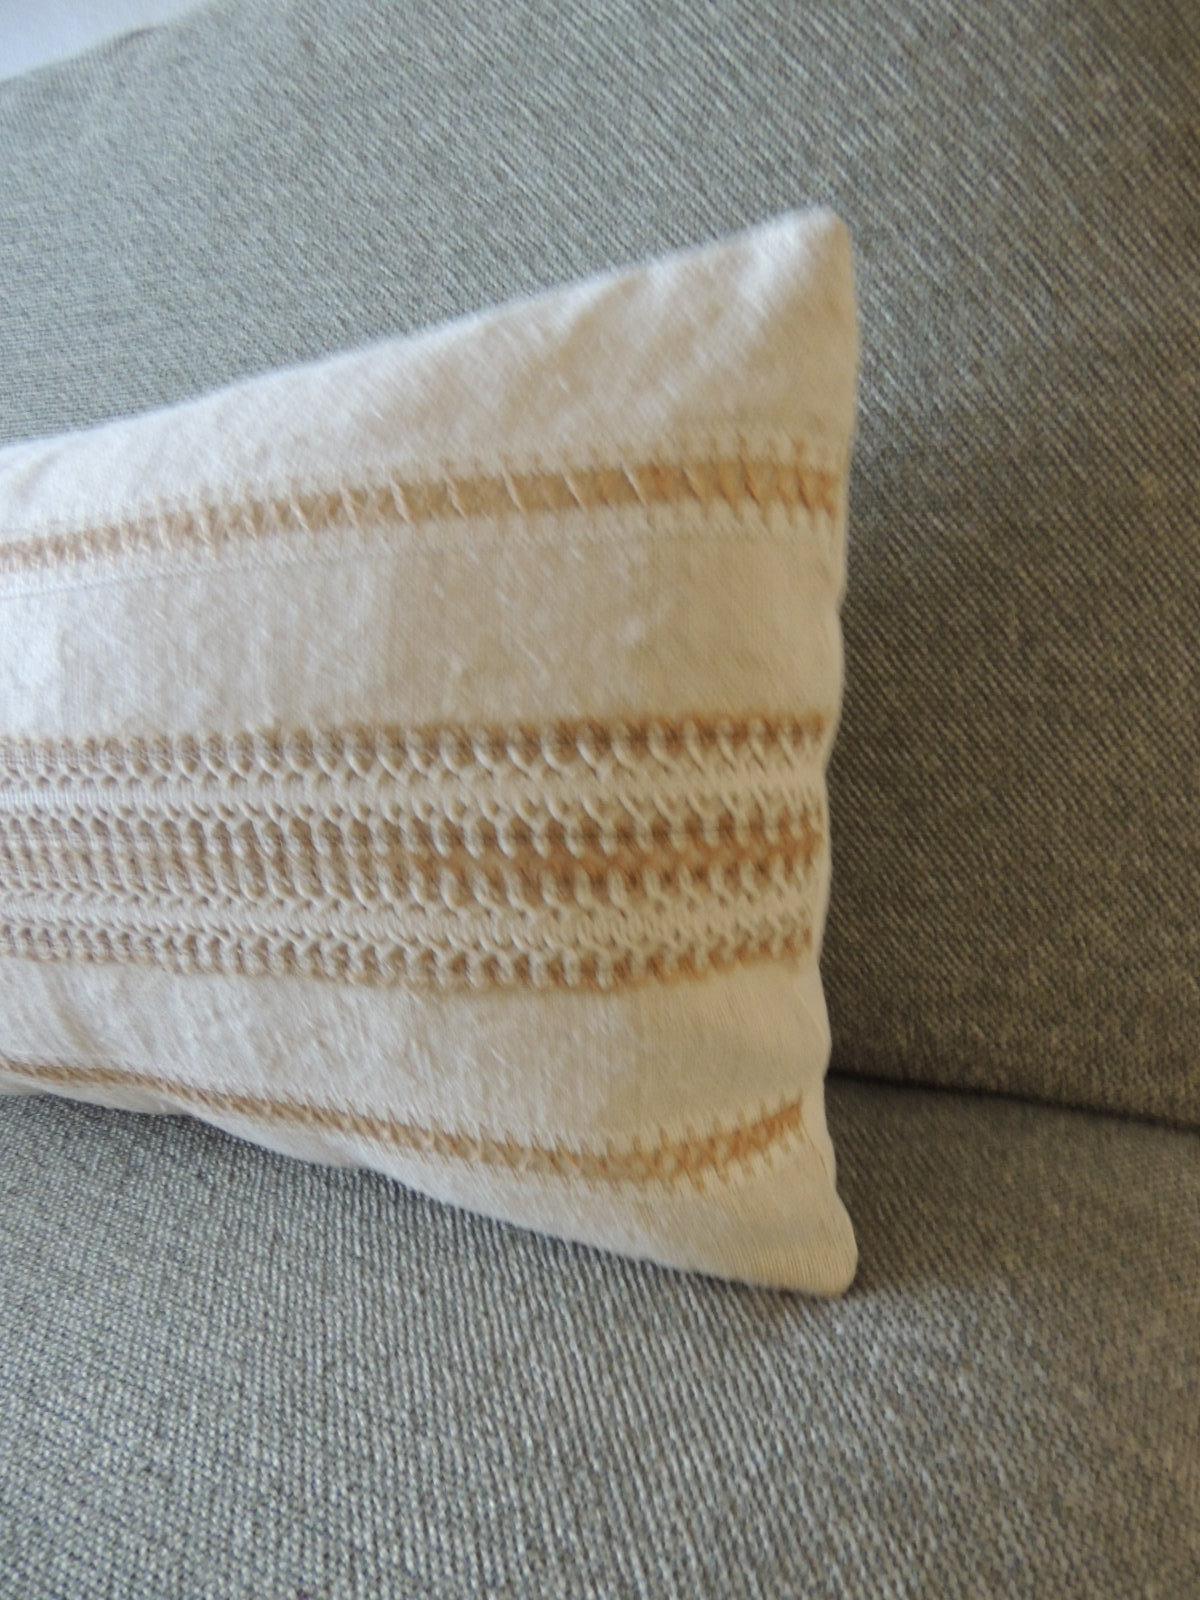 Antique linen decorative bolster pillow with vintage jute trim.
Woven white and tan trim.
Natural cotton backing.
Decorative pillow handcrafted and designed in the USA.
Closure by stitch (no zipper closure) with custom made pillow insert.
Size: